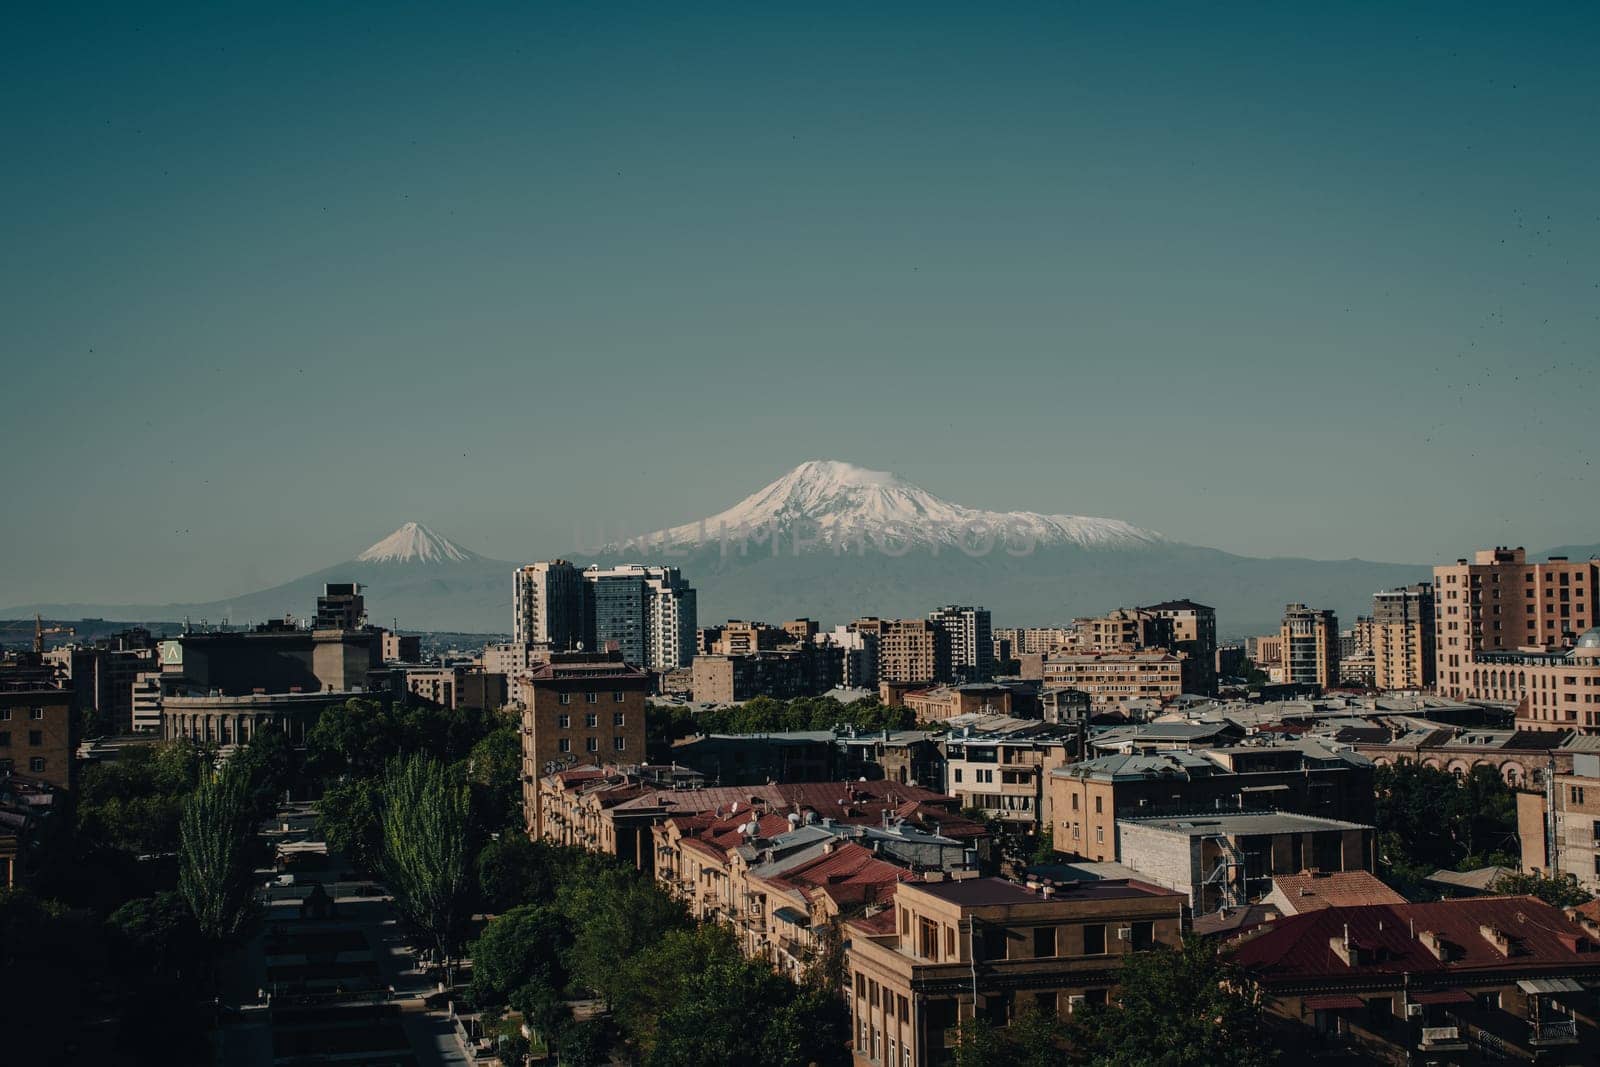 Cityscape with mountain view in a day time concept photo. Yerevan, capital of Armenia in front of mountain Ararat. Beautiful urban scenery from parkland. High quality picture for magazine, article